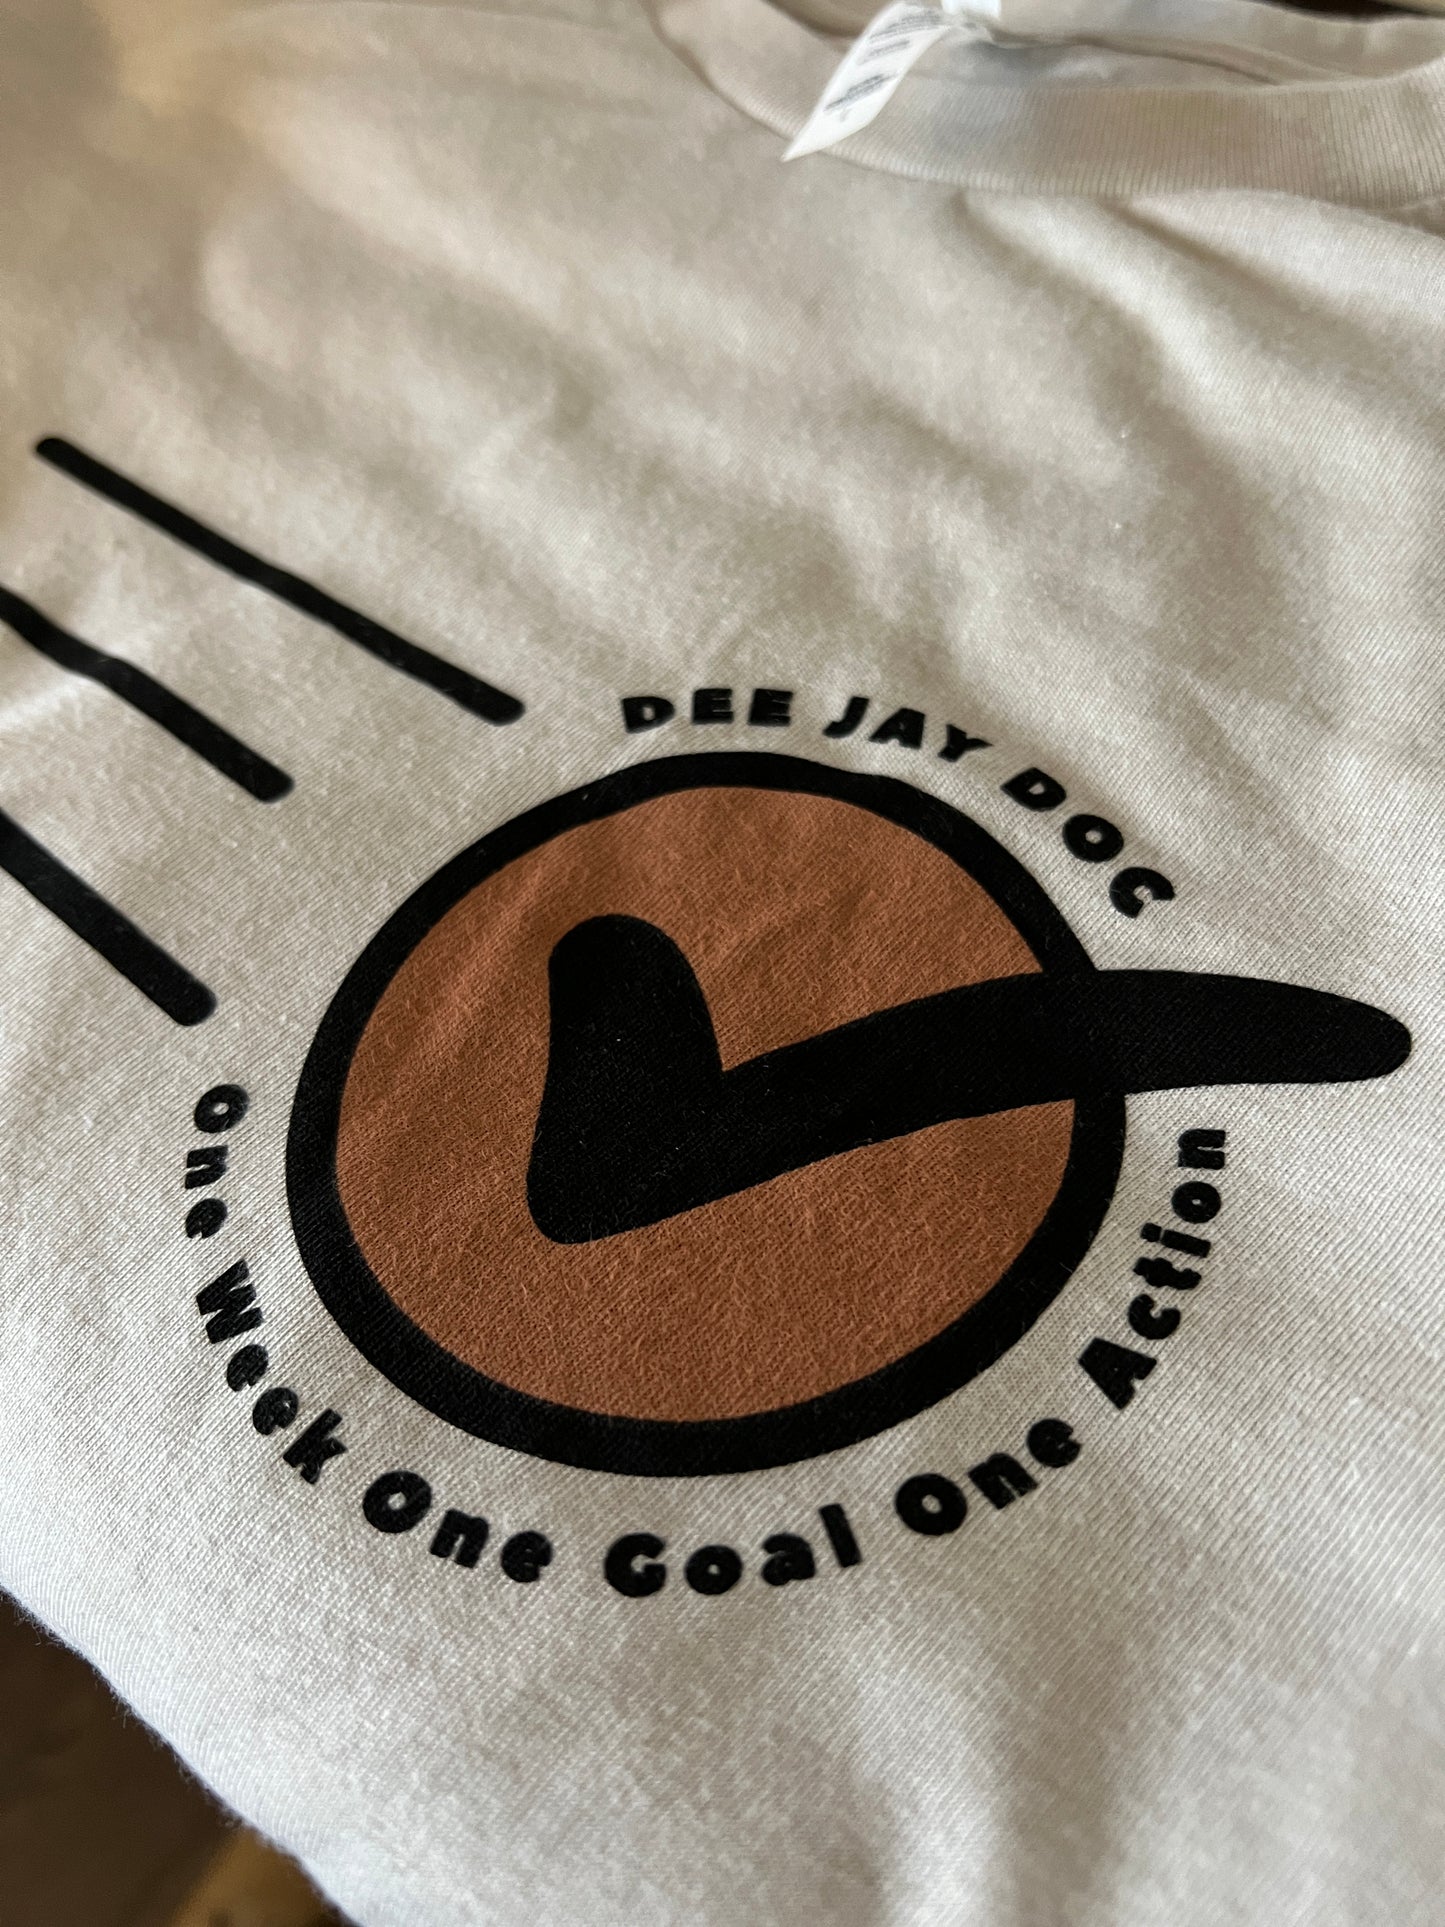 One Action - Limited Edition T-shirt